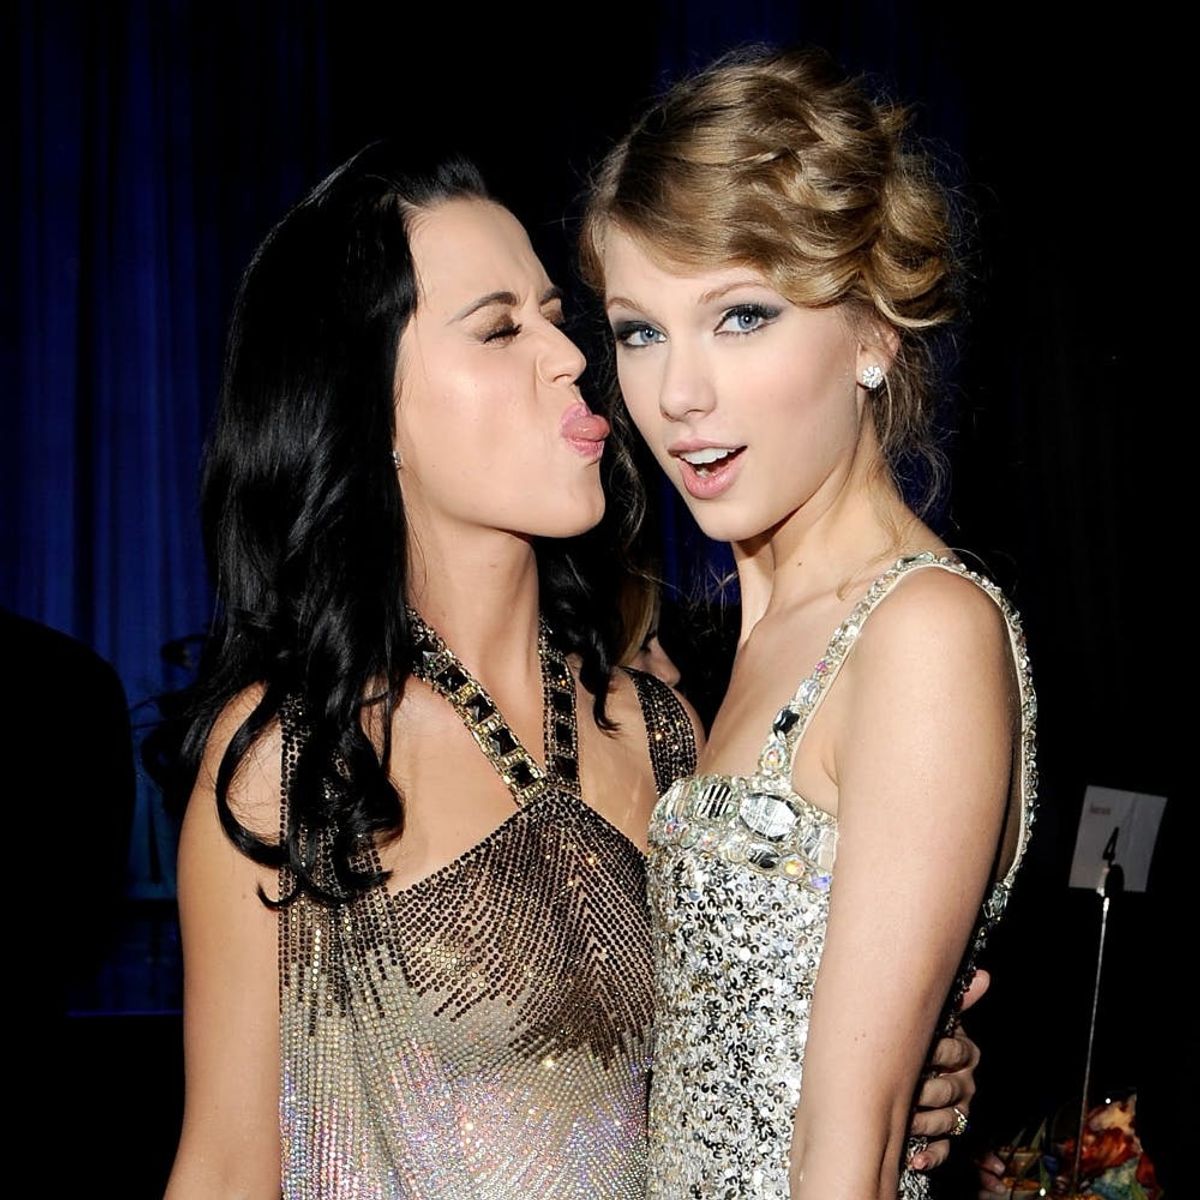 Here’s How Katy Perry and Taylor Swift Went from Friends to Feuding